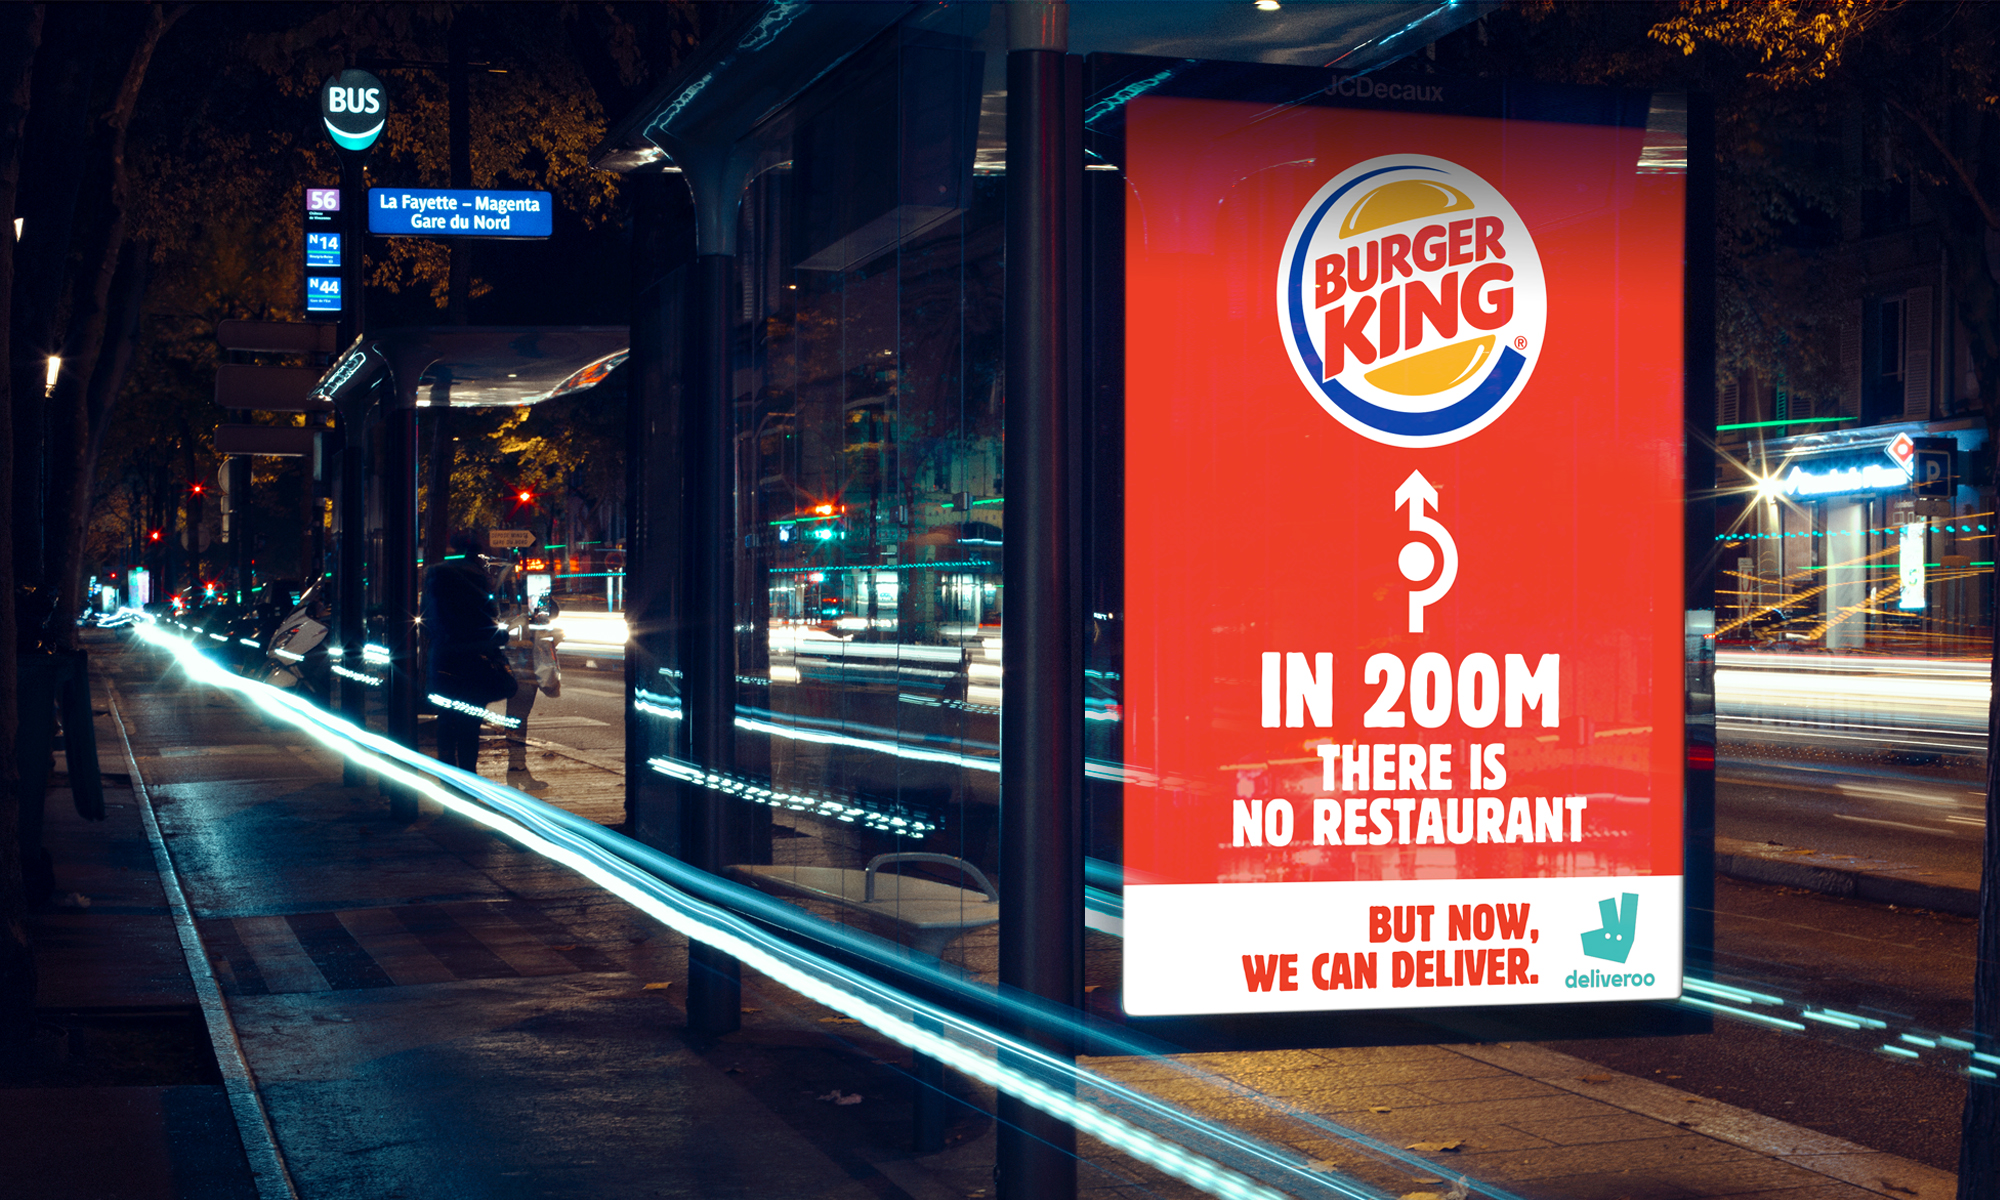 Burger King's Latest Campaign Drives Customers To NonExistent